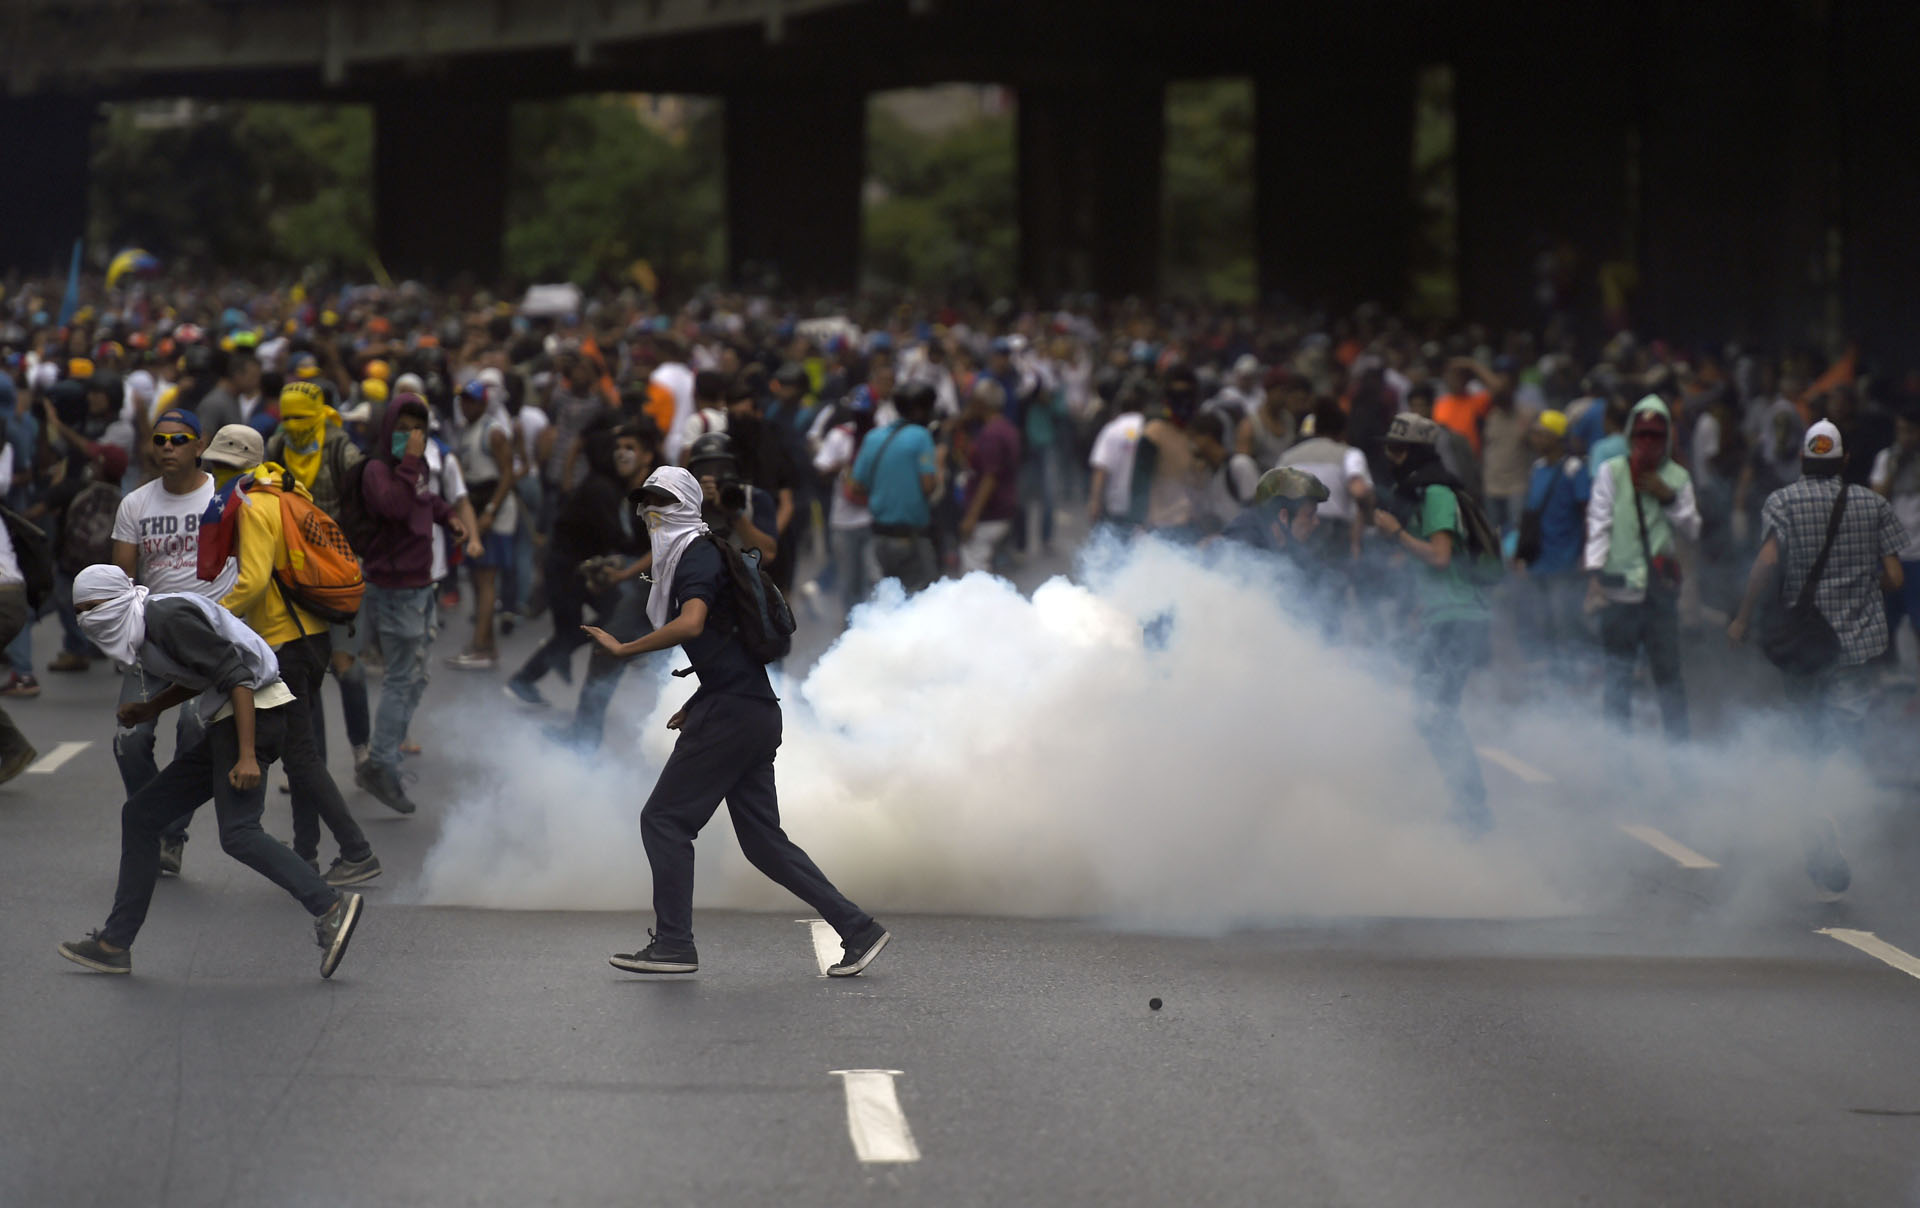 Venezuelan opposition activists hold a protest against the government of President Nicolas Maduro on April 6, 2017 in Caracas. The center-right opposition vowed fresh street protests -after earlier unrest left dozens of people injured - to increase pressure on Maduro, whom they blame for the country's economic crisis. / AFP PHOTO / JUAN BARRETO